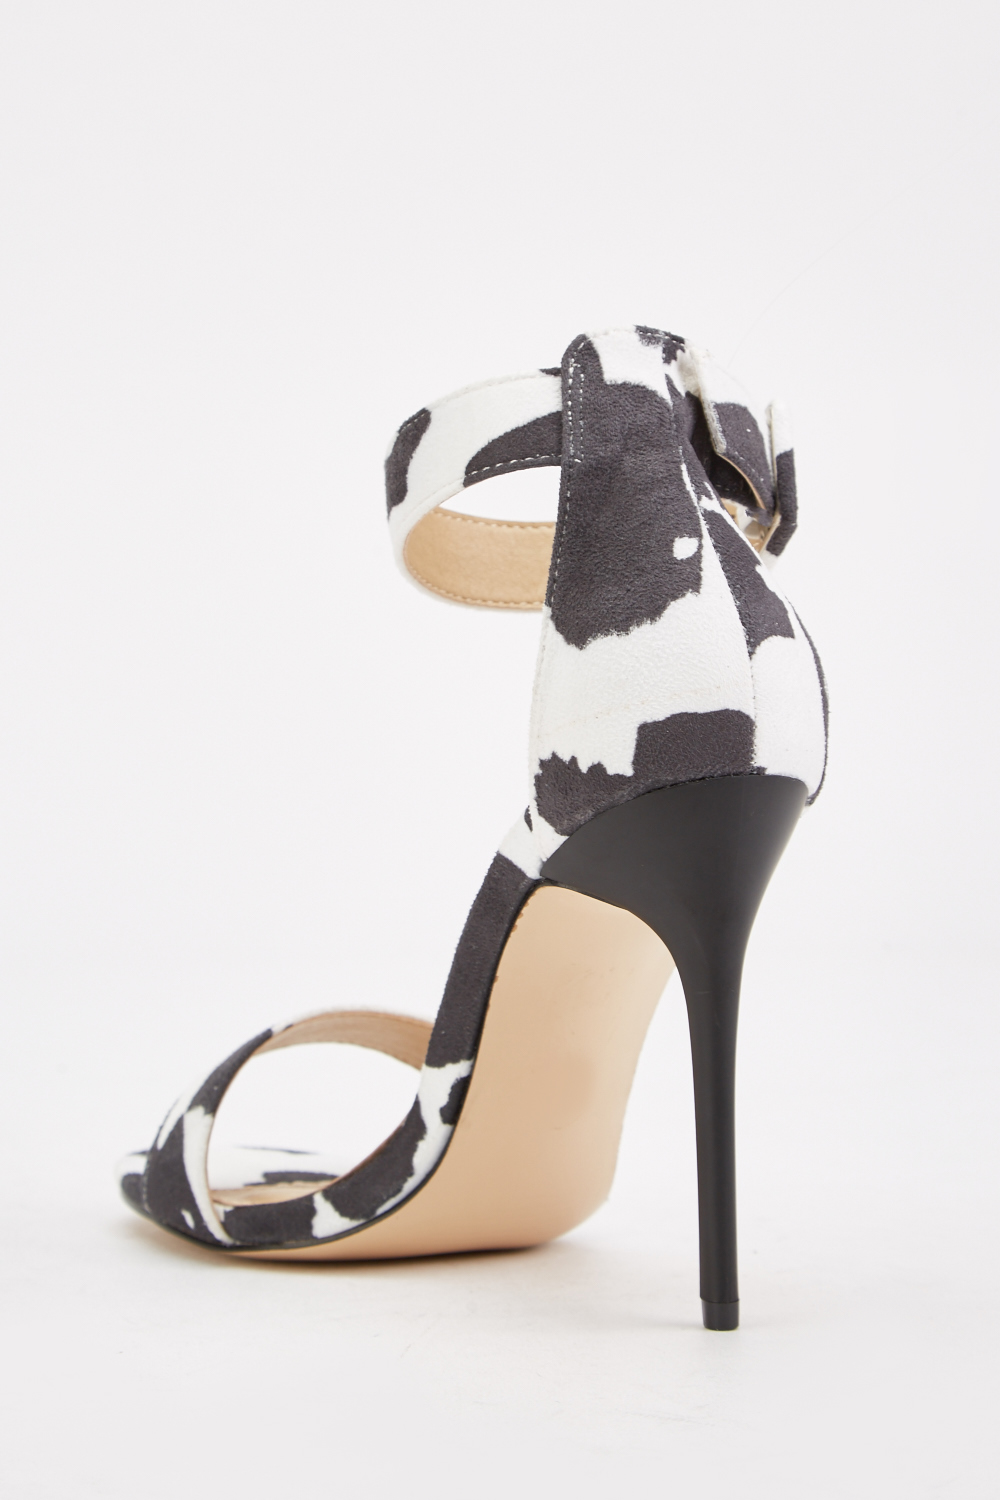 Cow Print Ankle Strap Heels Just 7